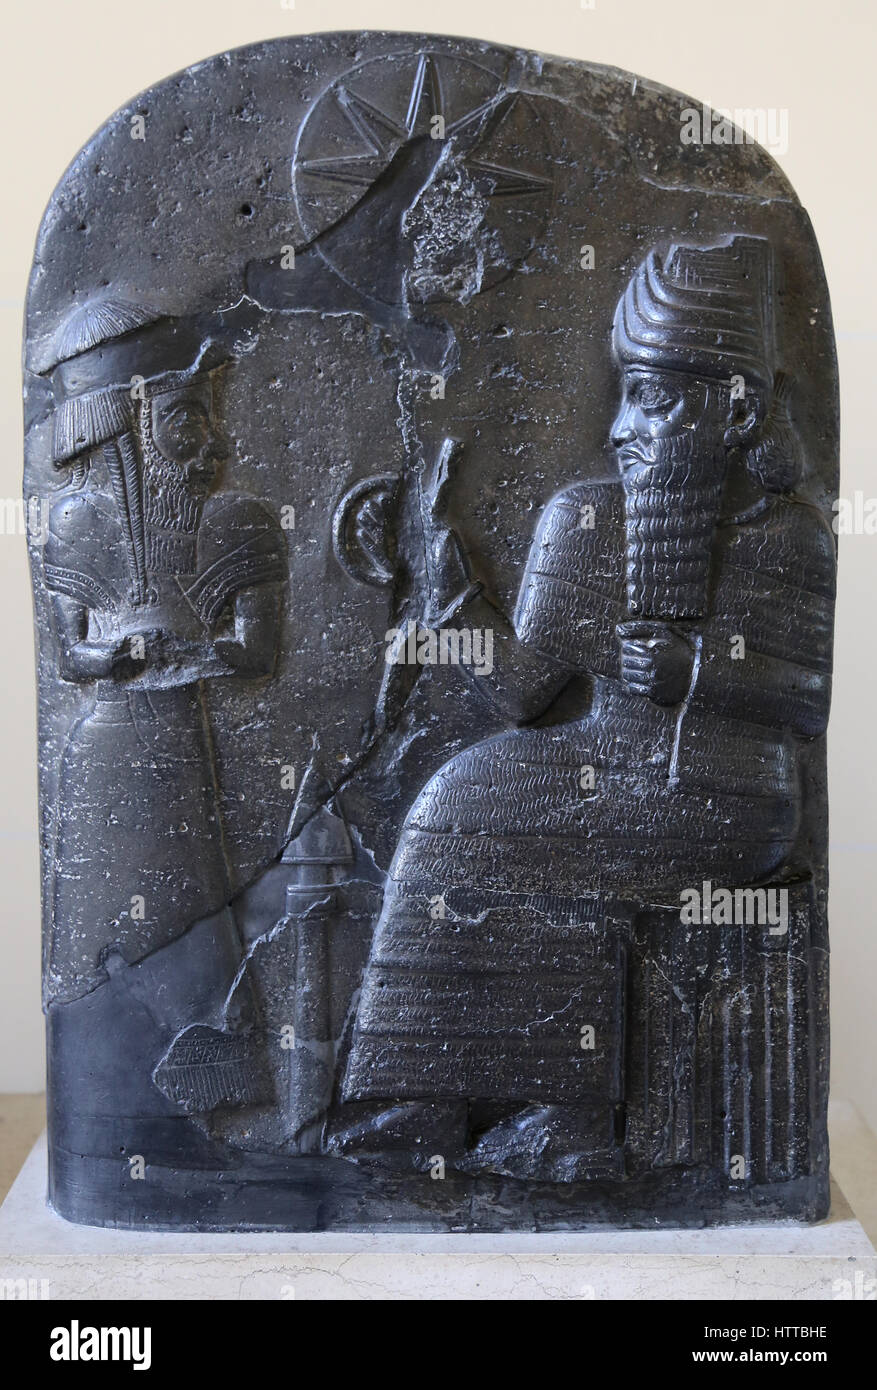 Babylonian stele usurped by Elamite King. Basalt. 12th century BC. From Susa. Mesopotamia. Iraq. Louvre Museum. Stock Photo